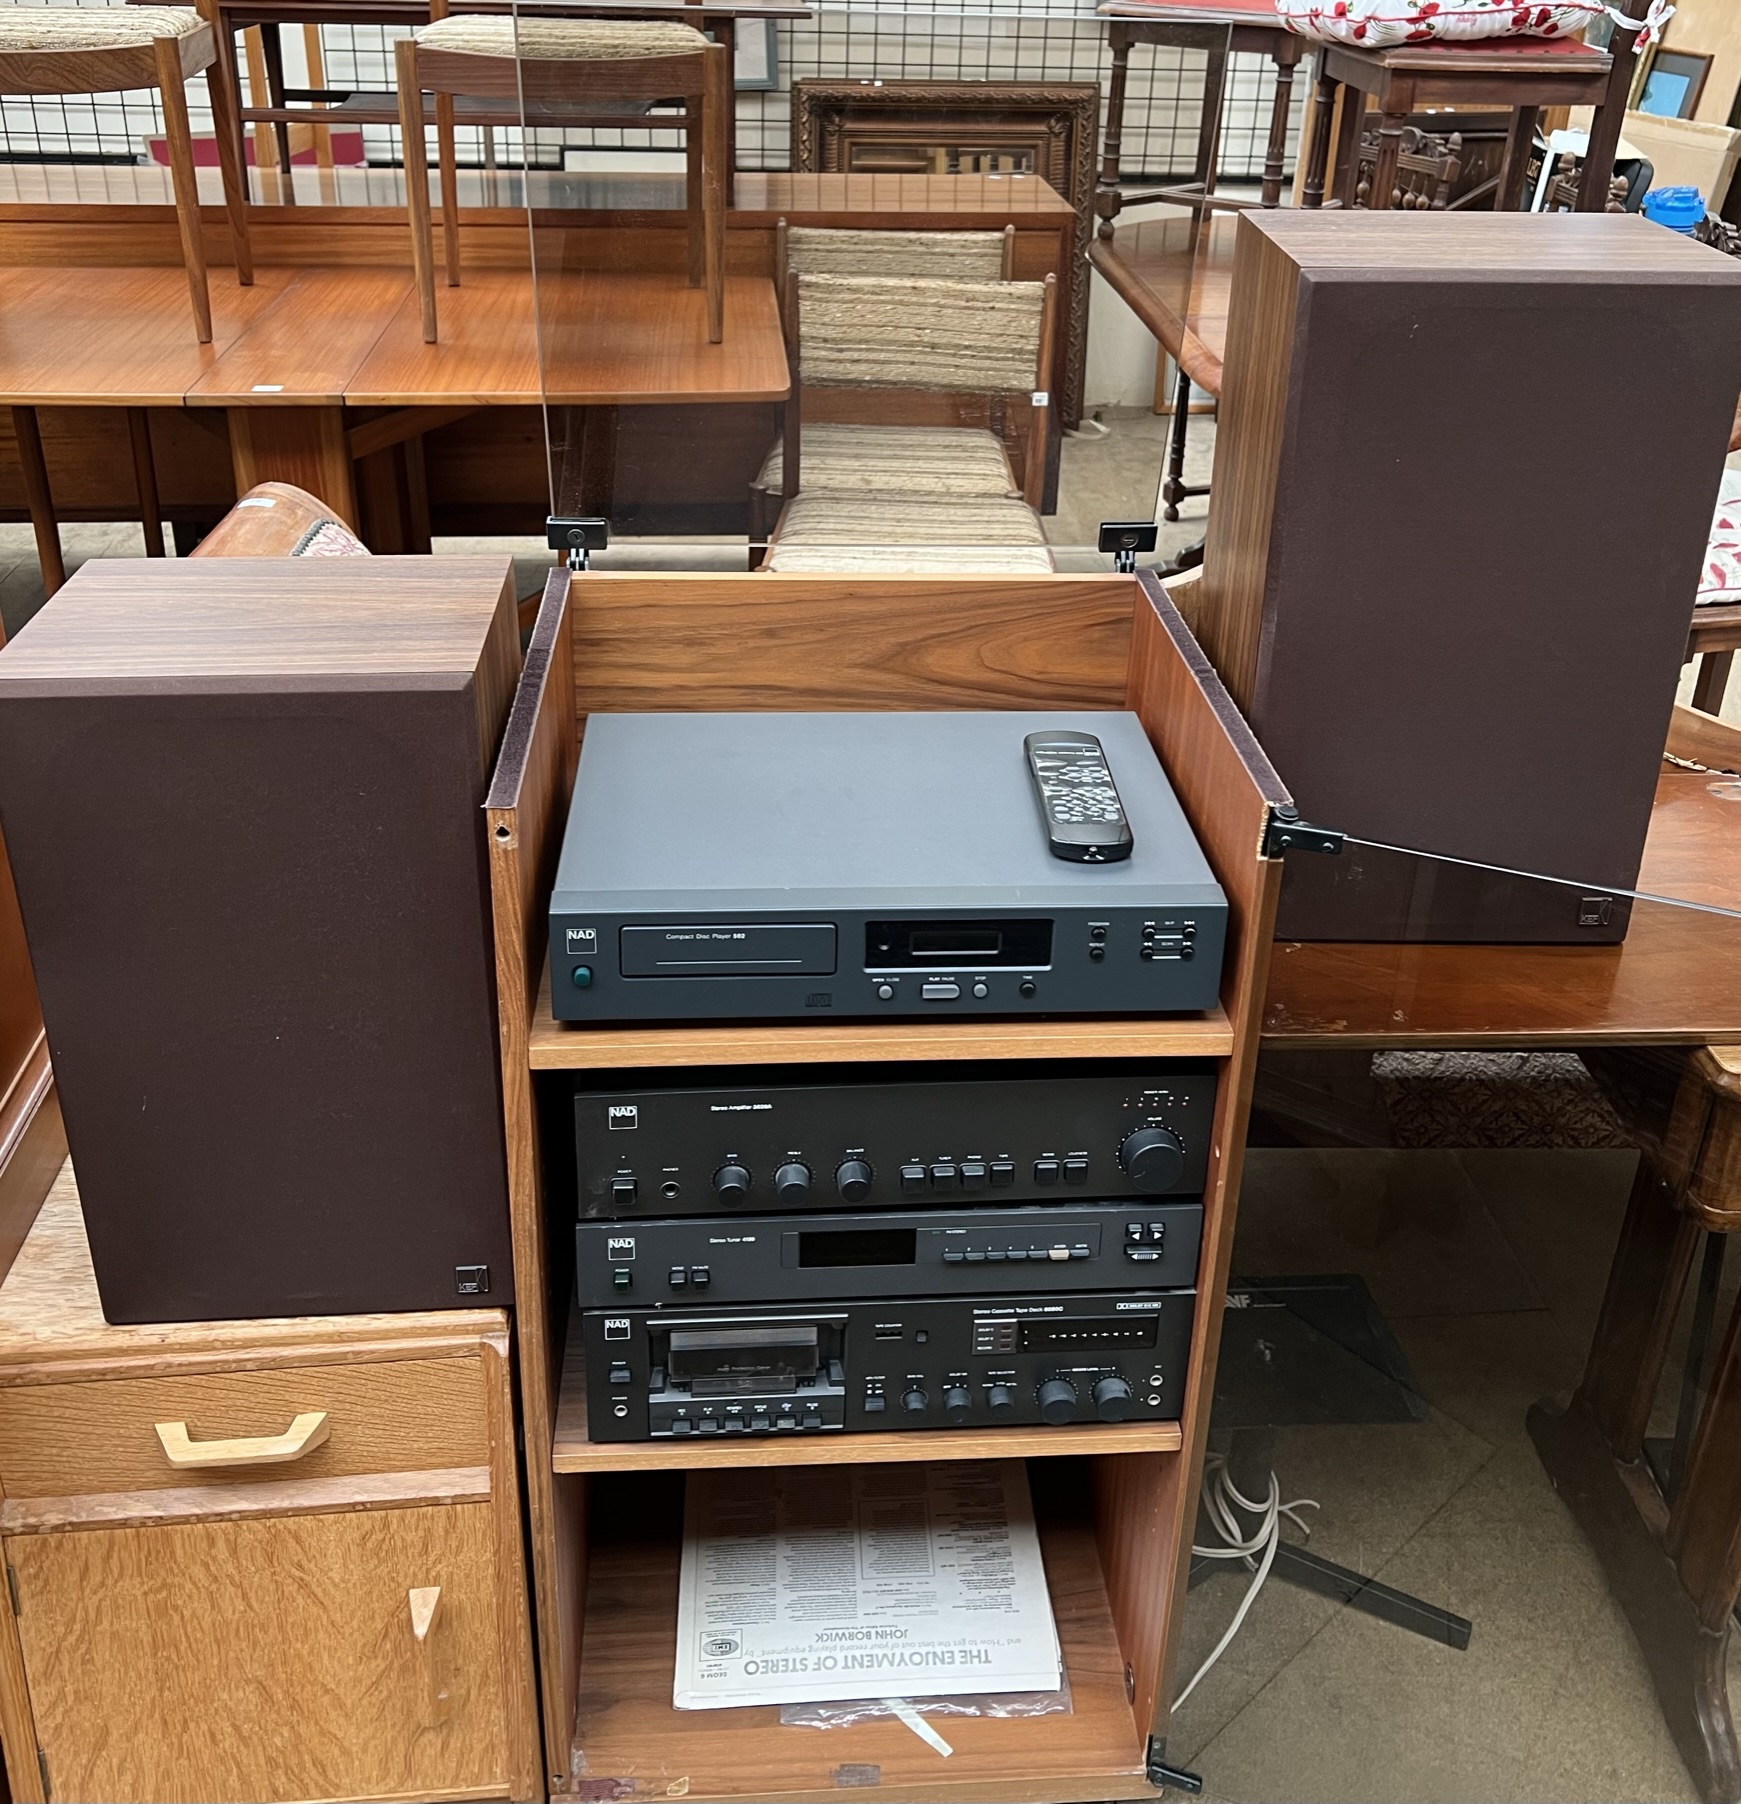 A NAD stereo stacking system including a 502 Compact disc player, 3020A Stereo Amplifier,